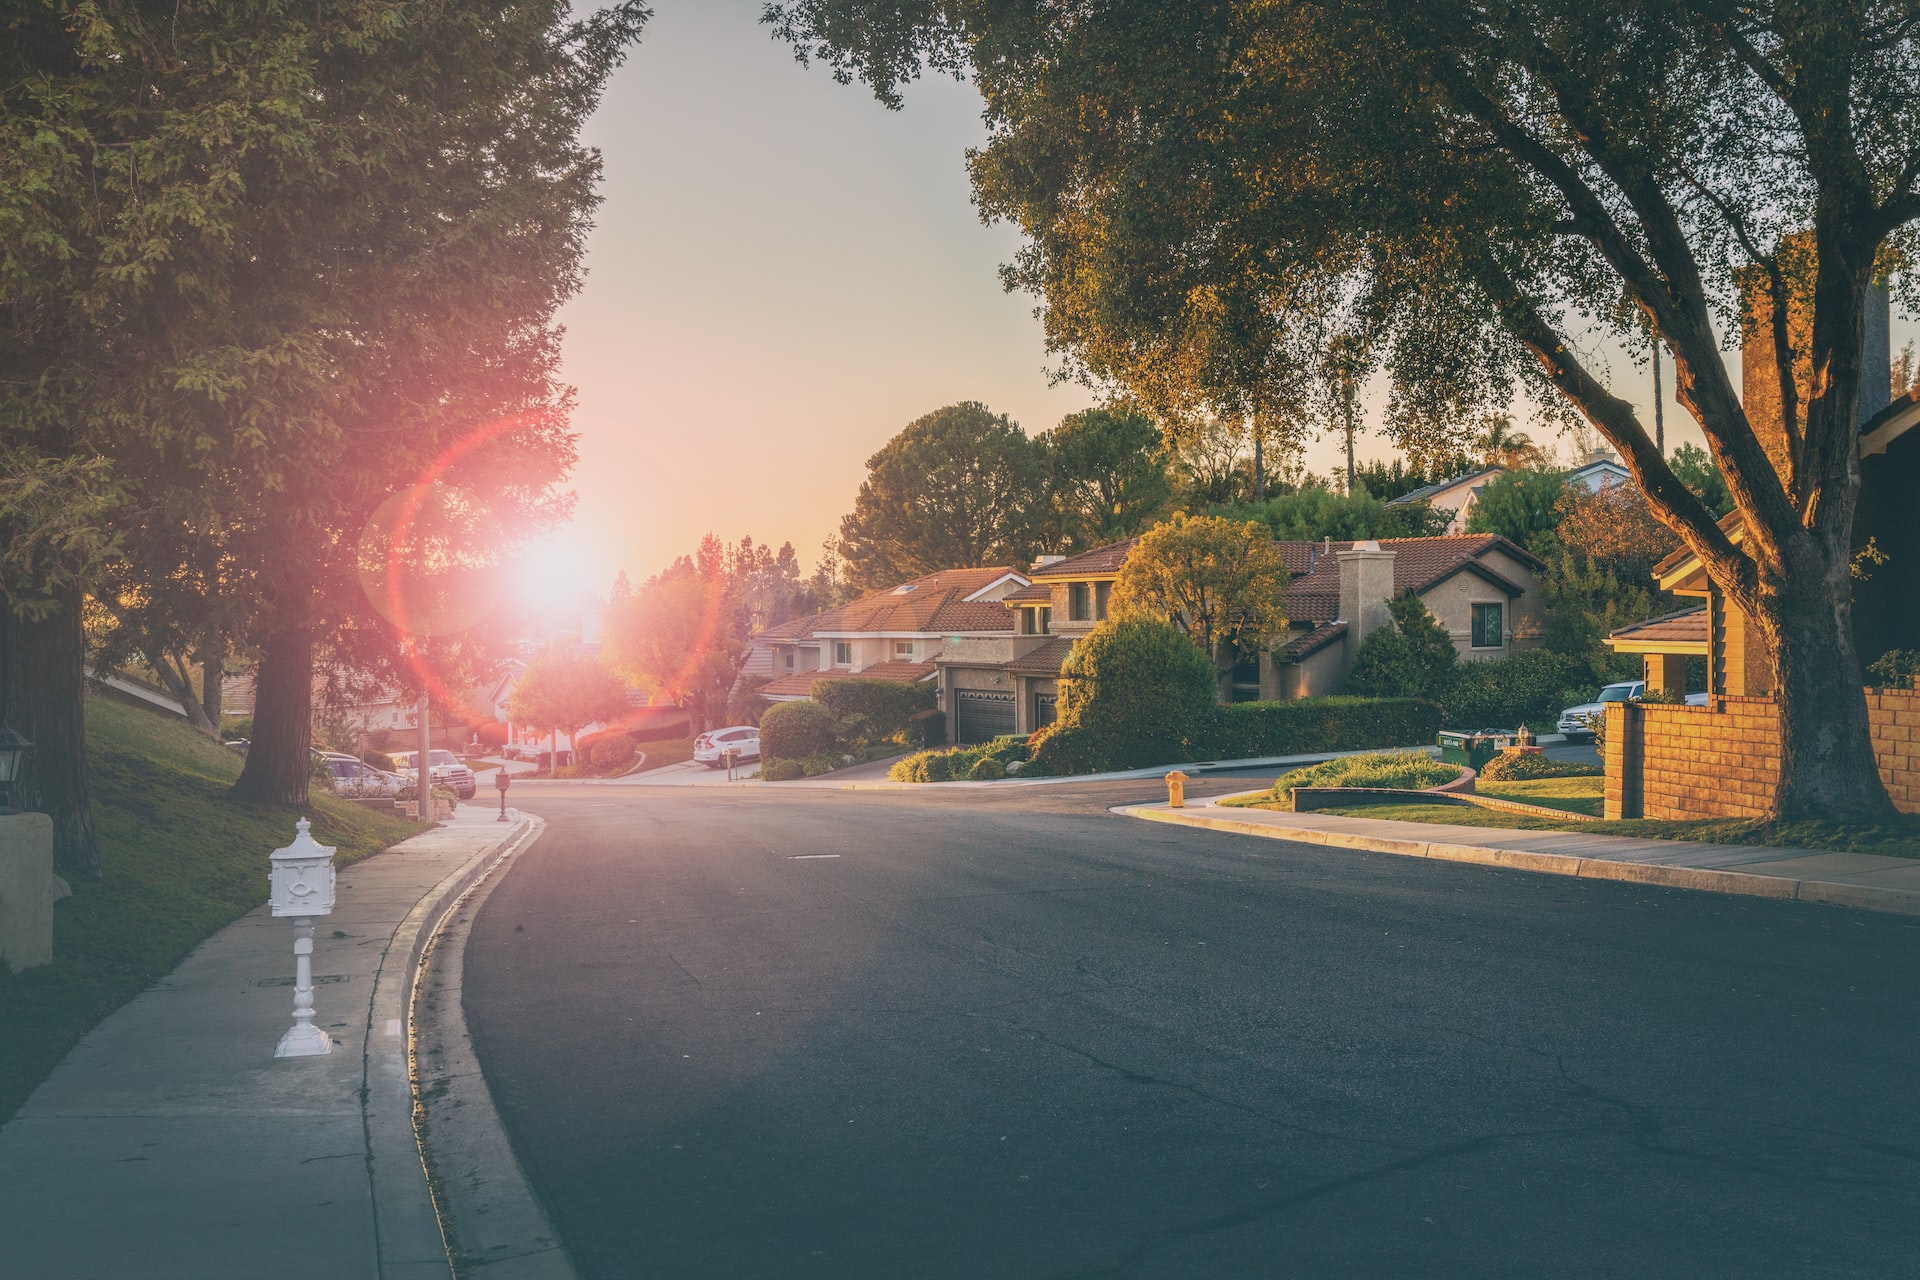 View of a residential street lined with houses at sunset, representing real estate deals and Certificates of Pending Litigation